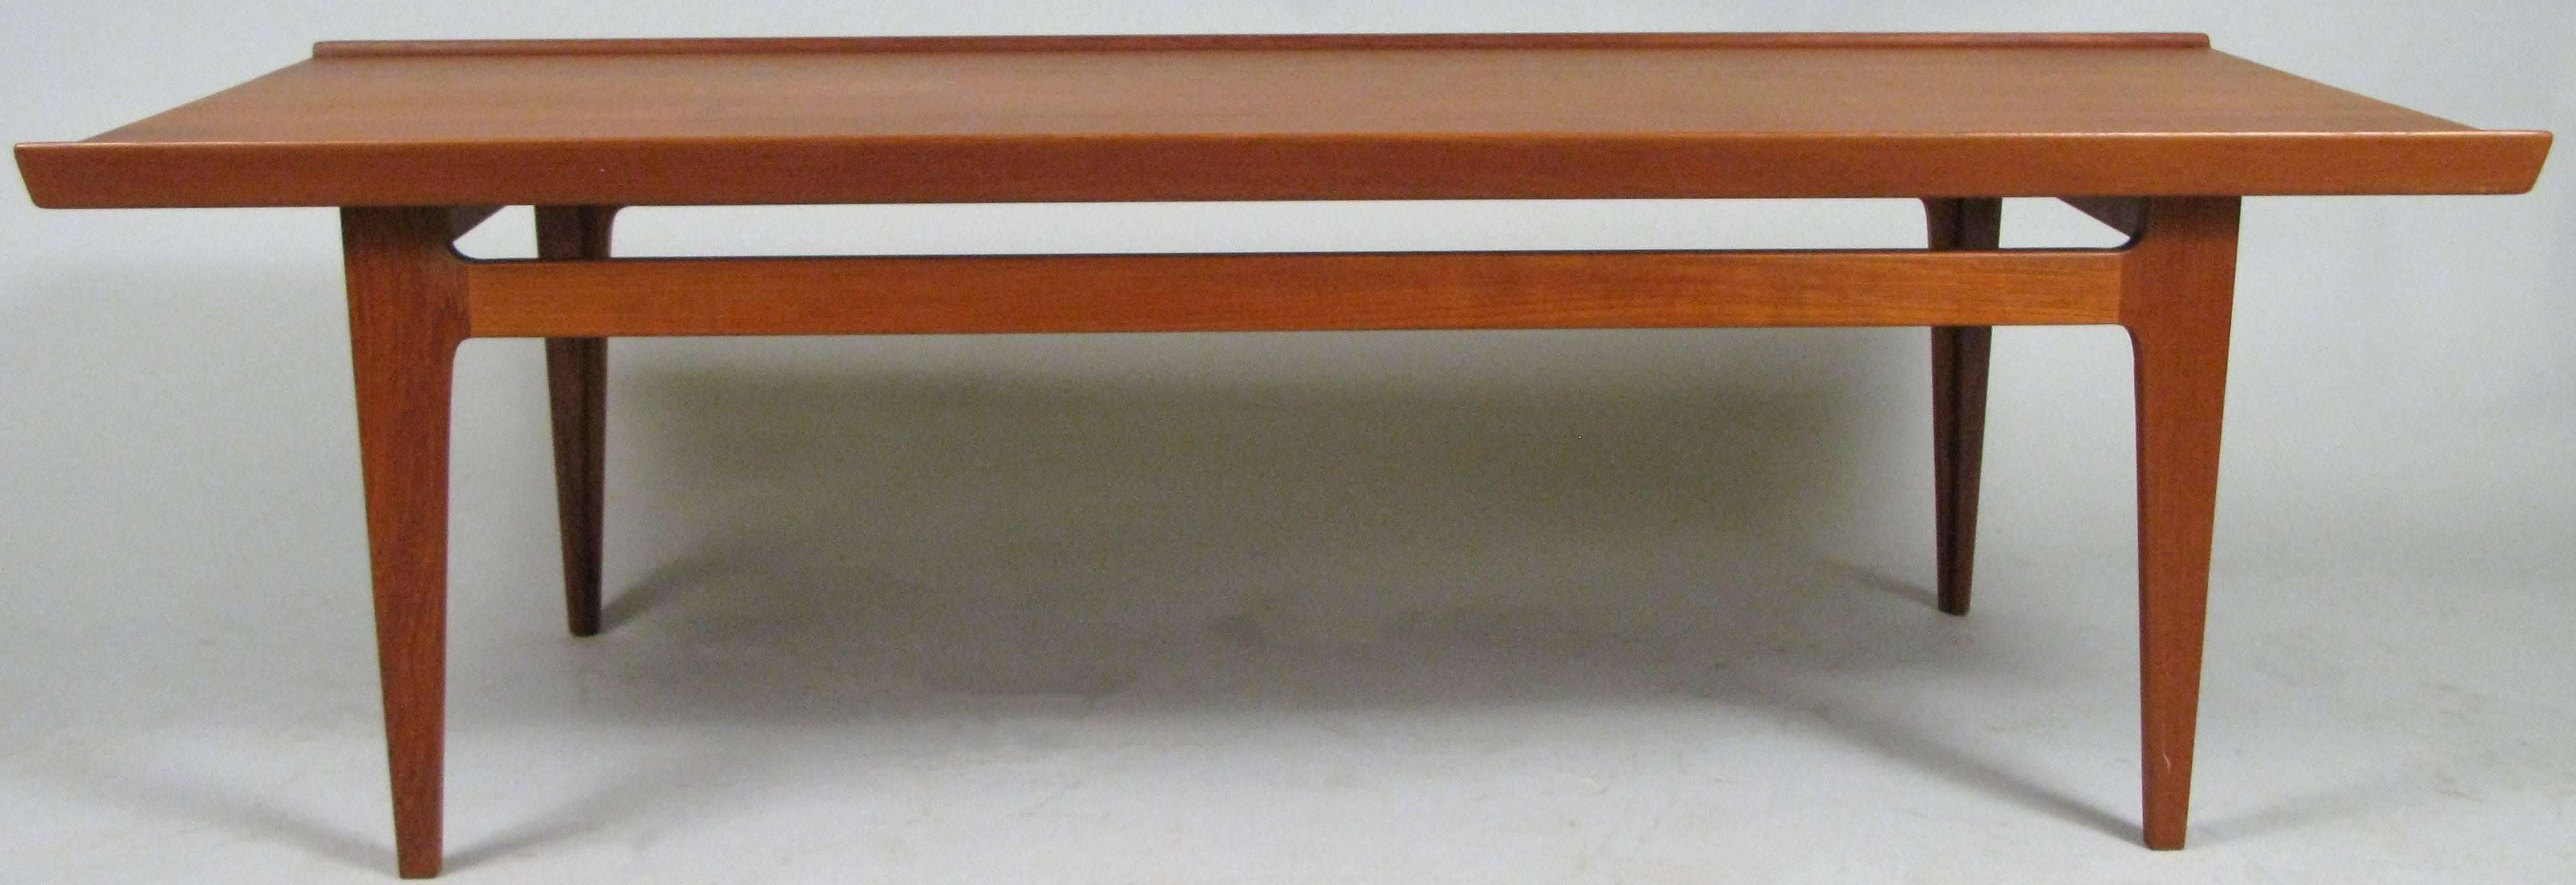 A very handsome vintage 1960s solid teak cocktail table designed by Finn Juhl, with subtle details including the raised edges, and beautiful wood grain. Stamped made in Denmark.